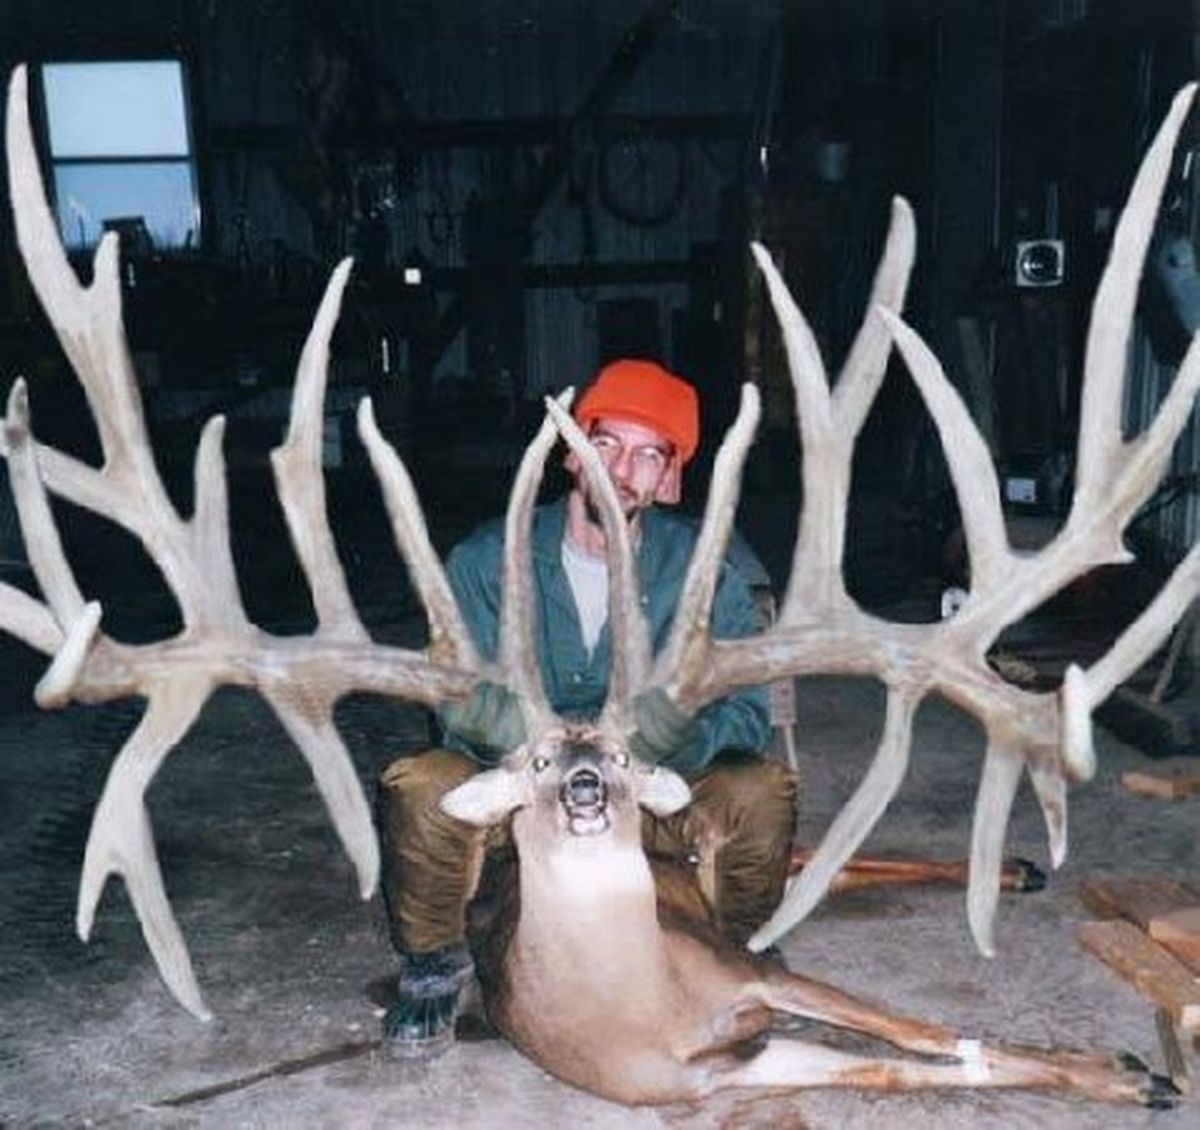 World record buck: This one's for real, trust me | The Spokesman-Review